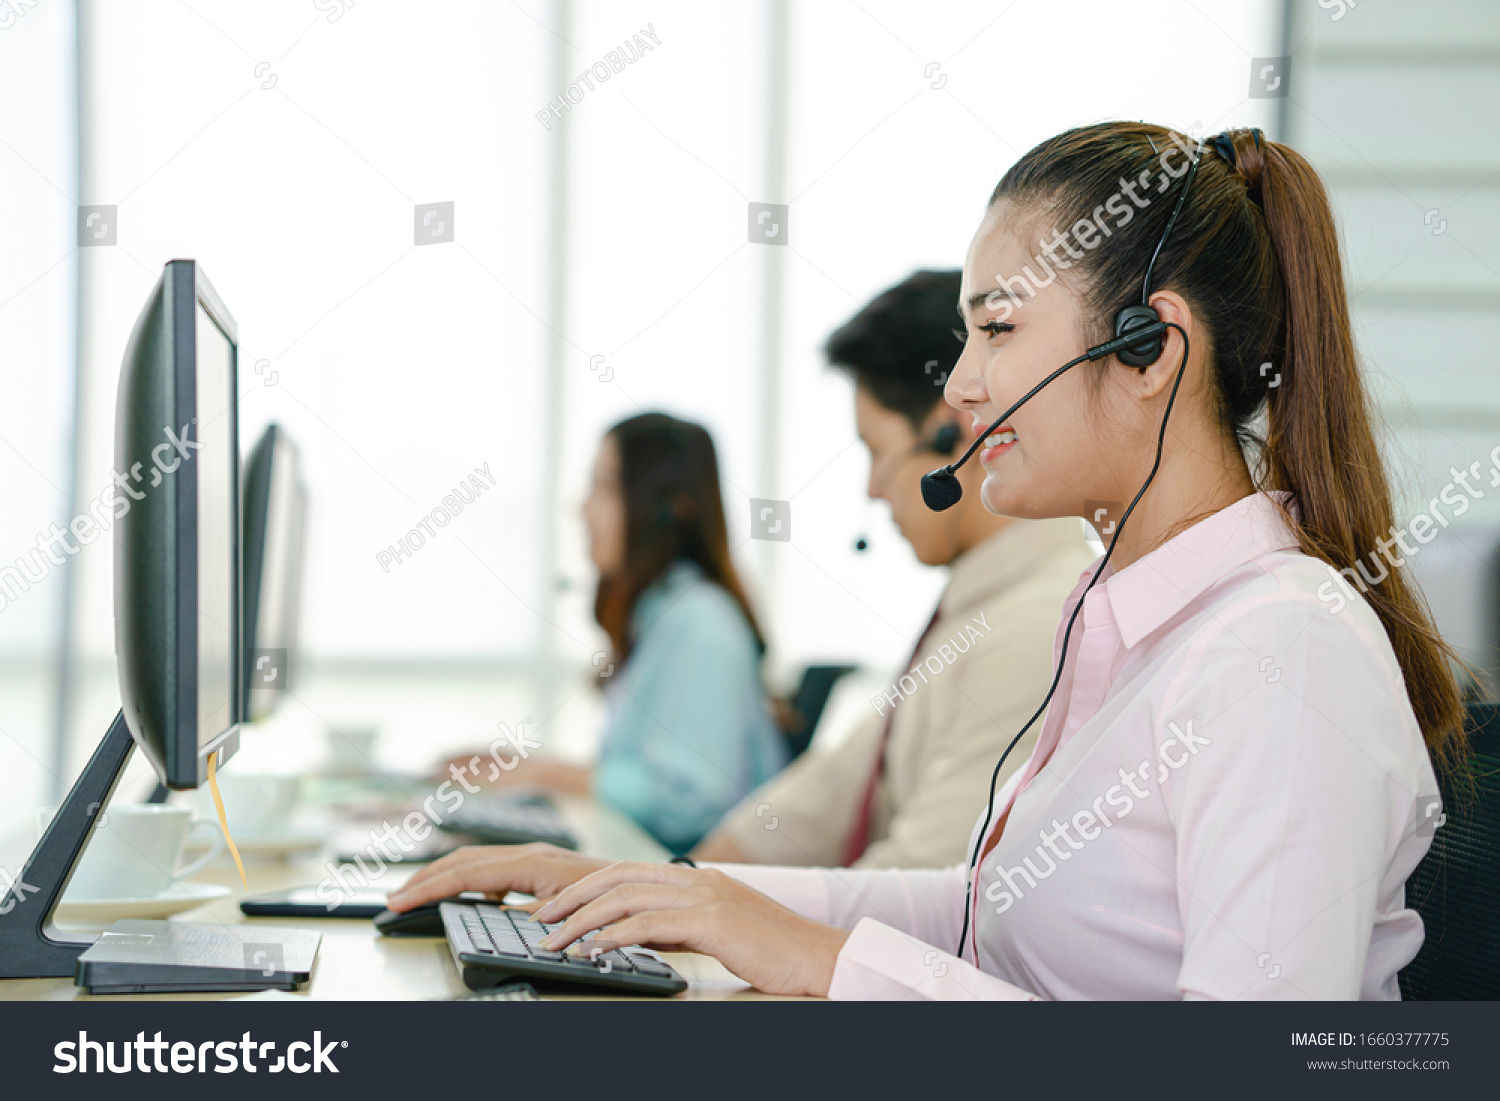 Call center worker accompanied by her team. Smiling customer support operator at work. Young employee working with a headset.
 #1660377775